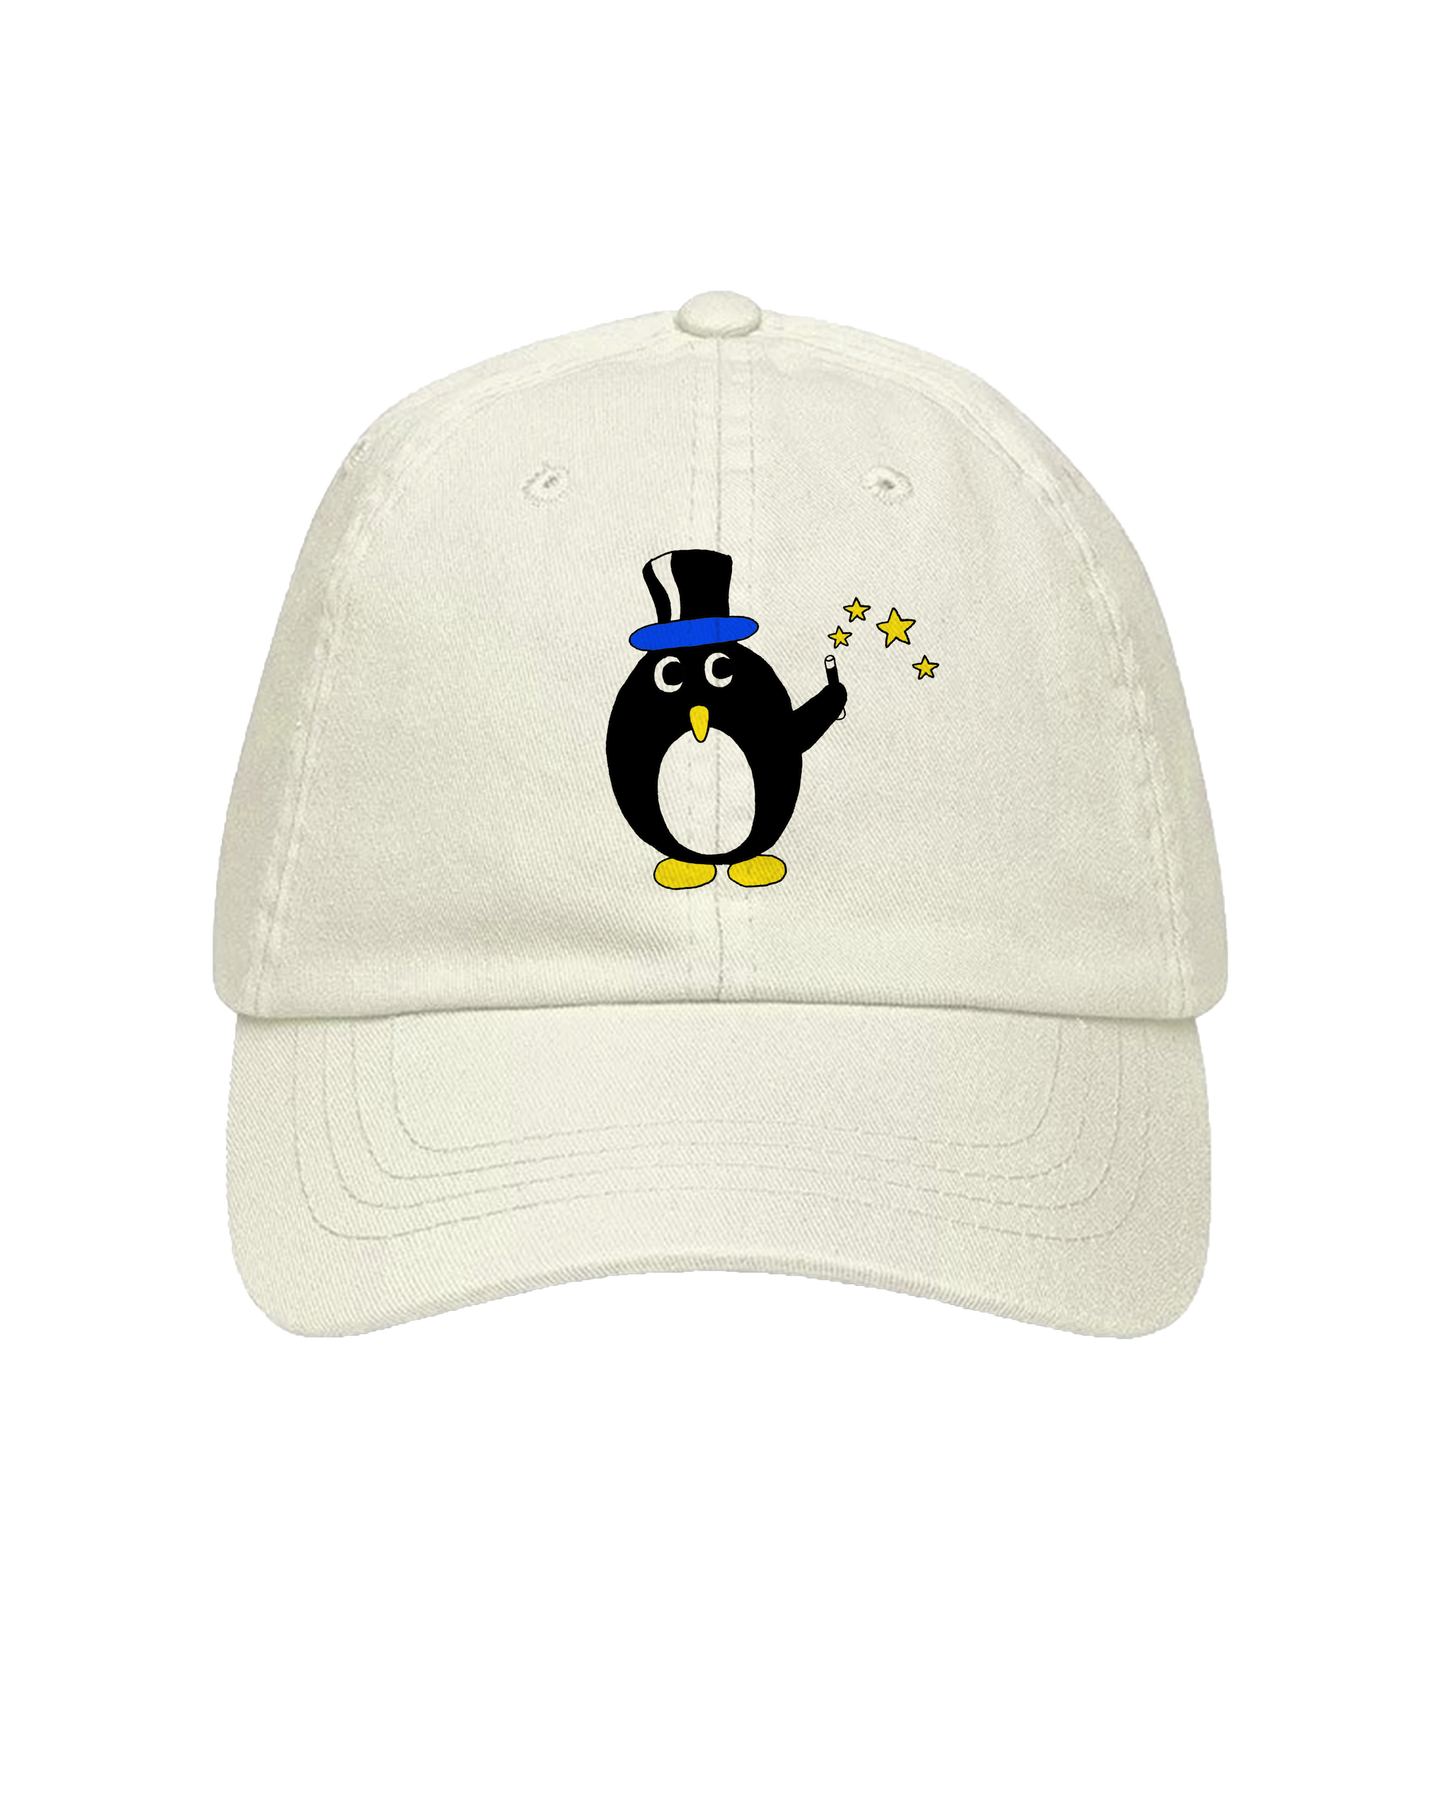 ILLUSION off white cap by Tom Bingham x Family Store